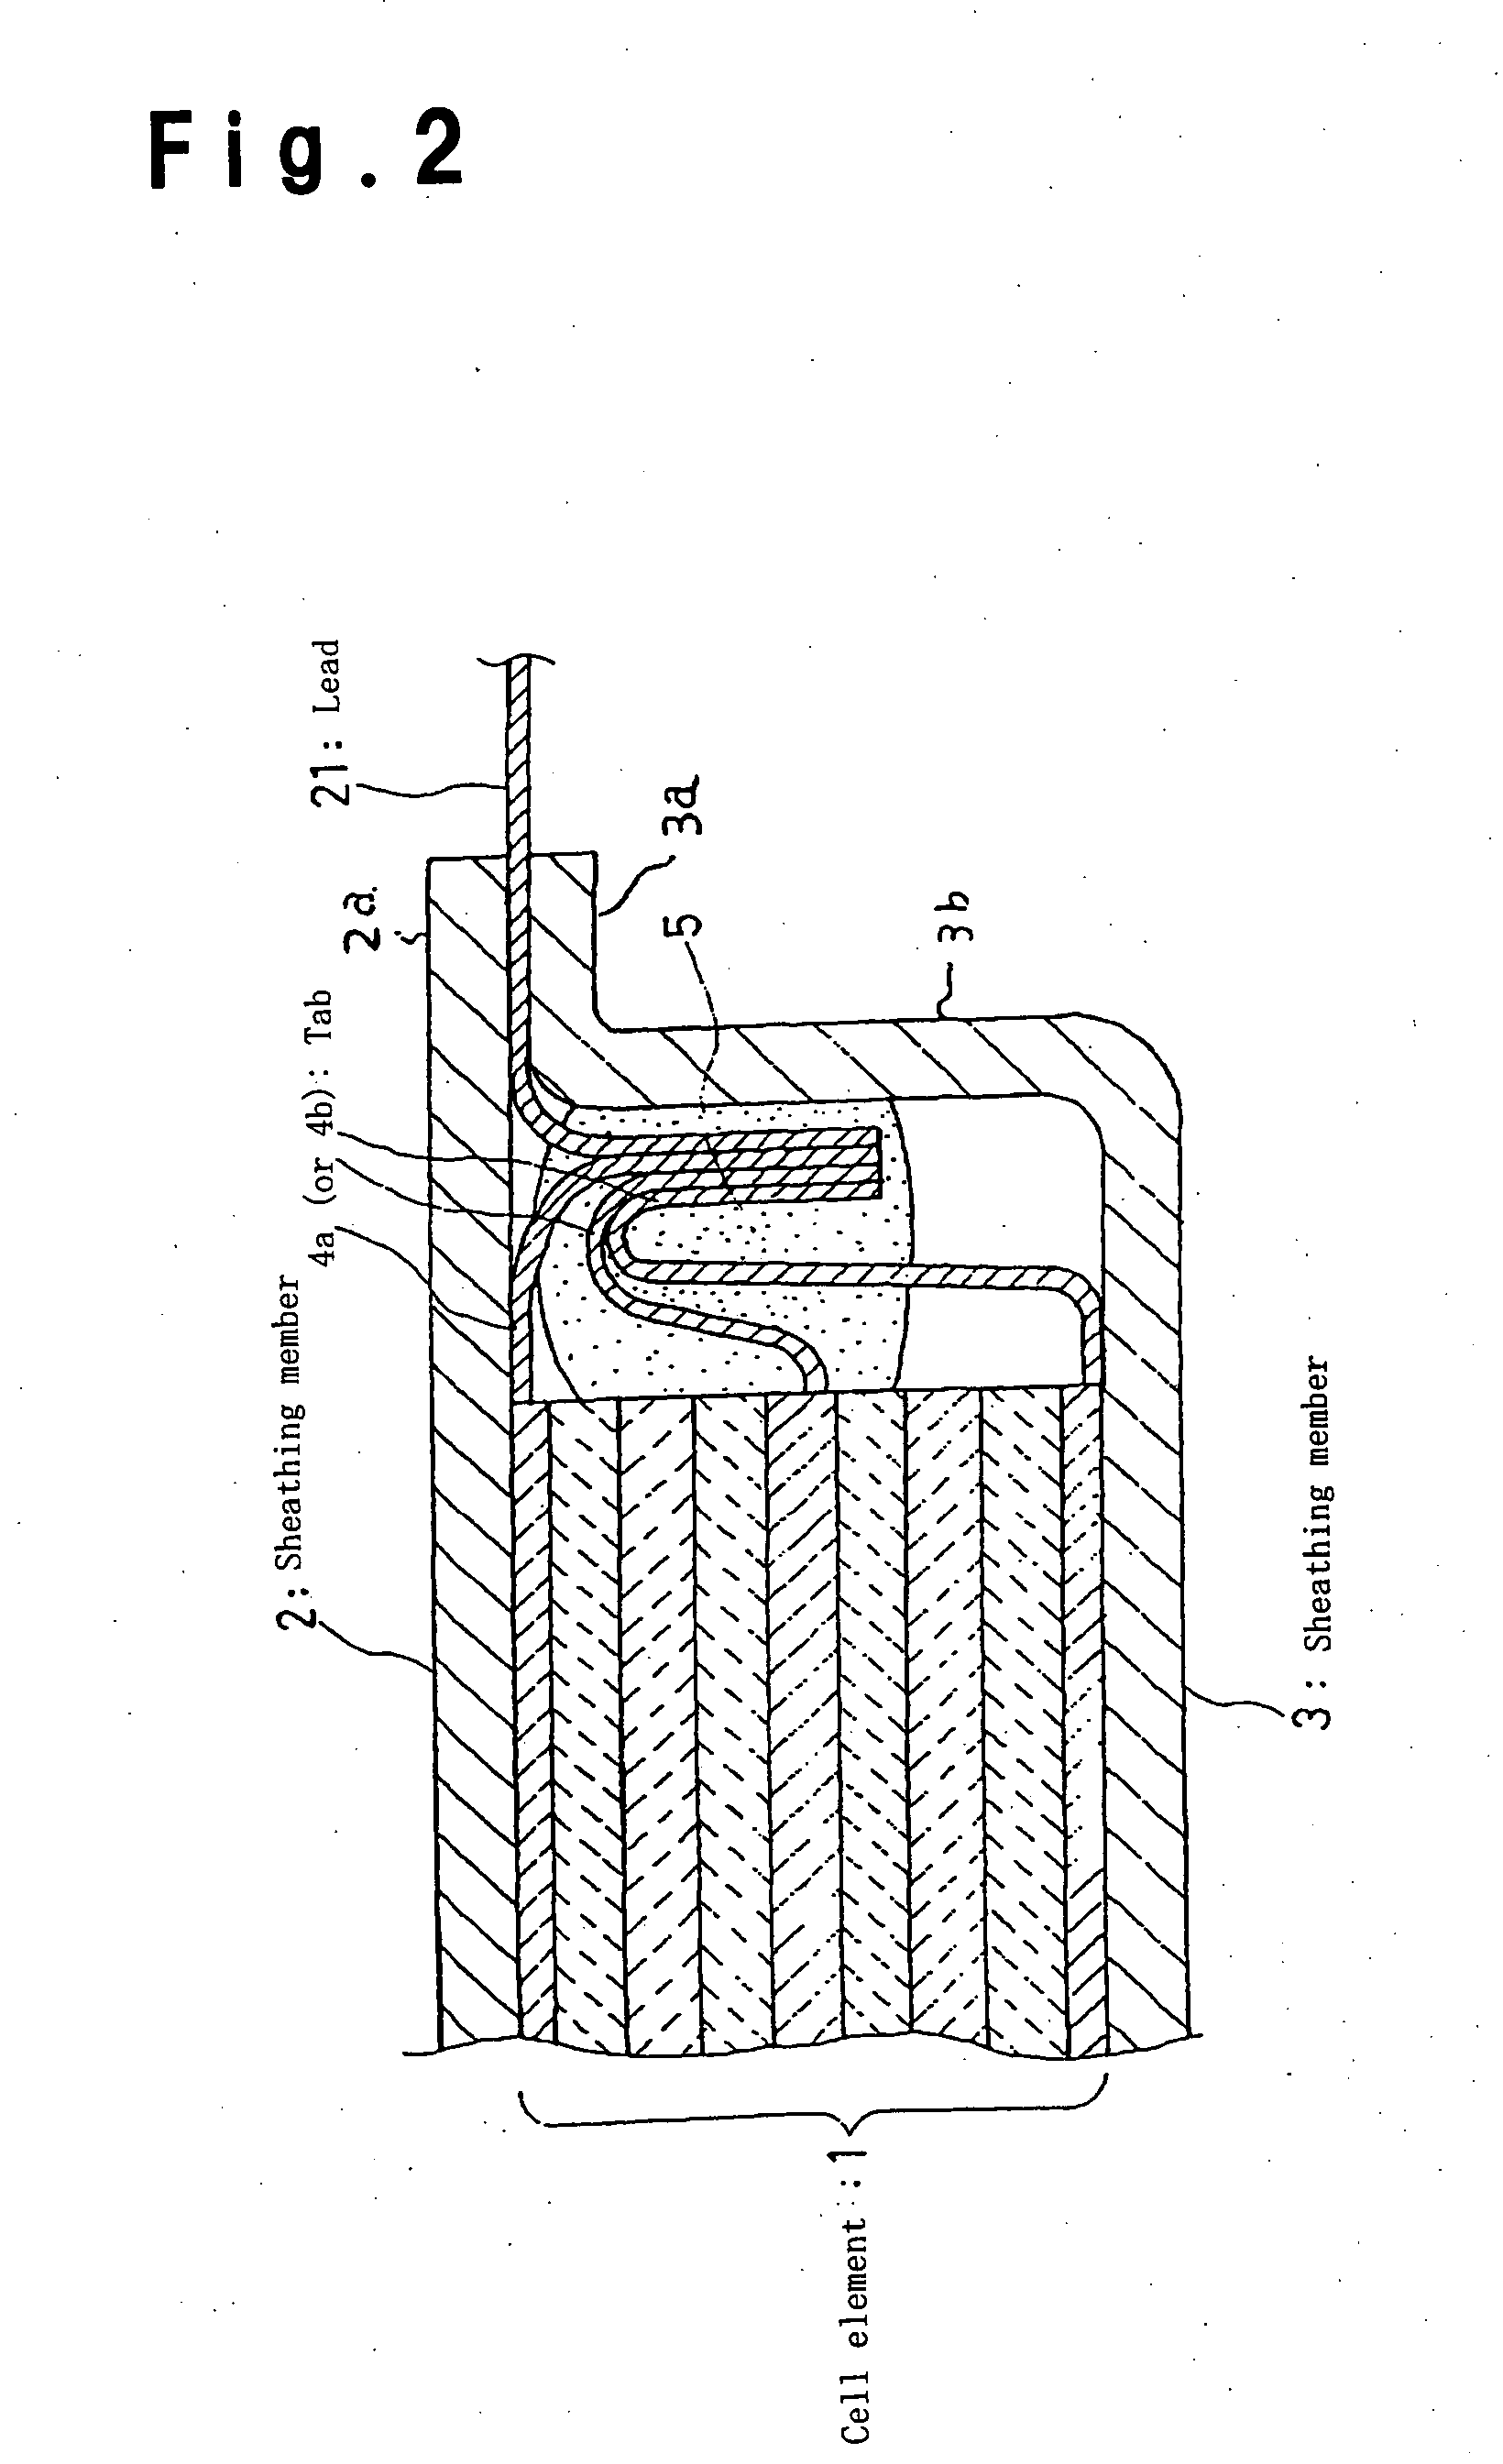 Lithium secondary cell